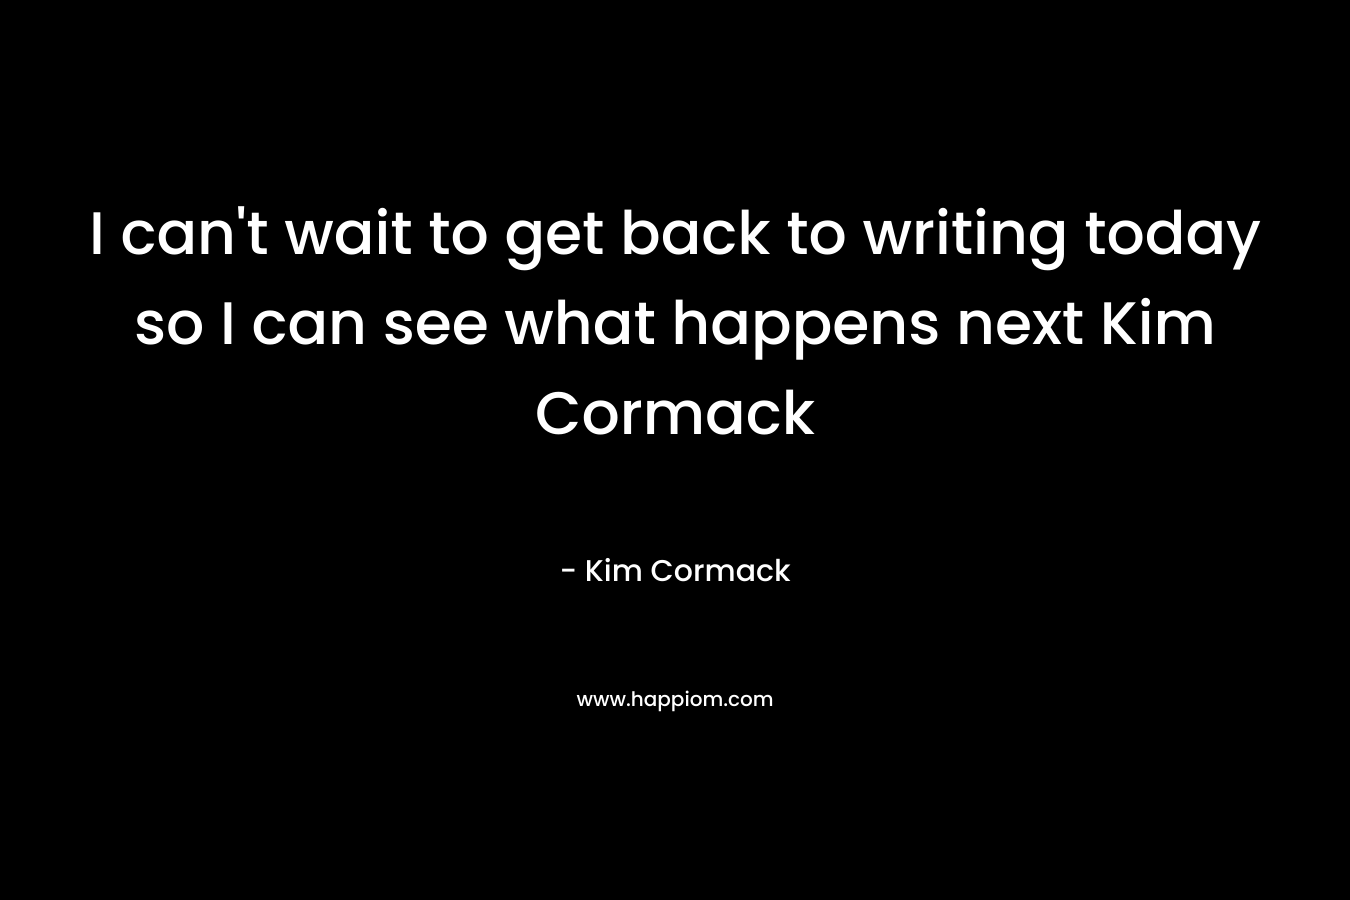 I can’t wait to get back to writing today so I can see what happens next Kim Cormack – Kim Cormack